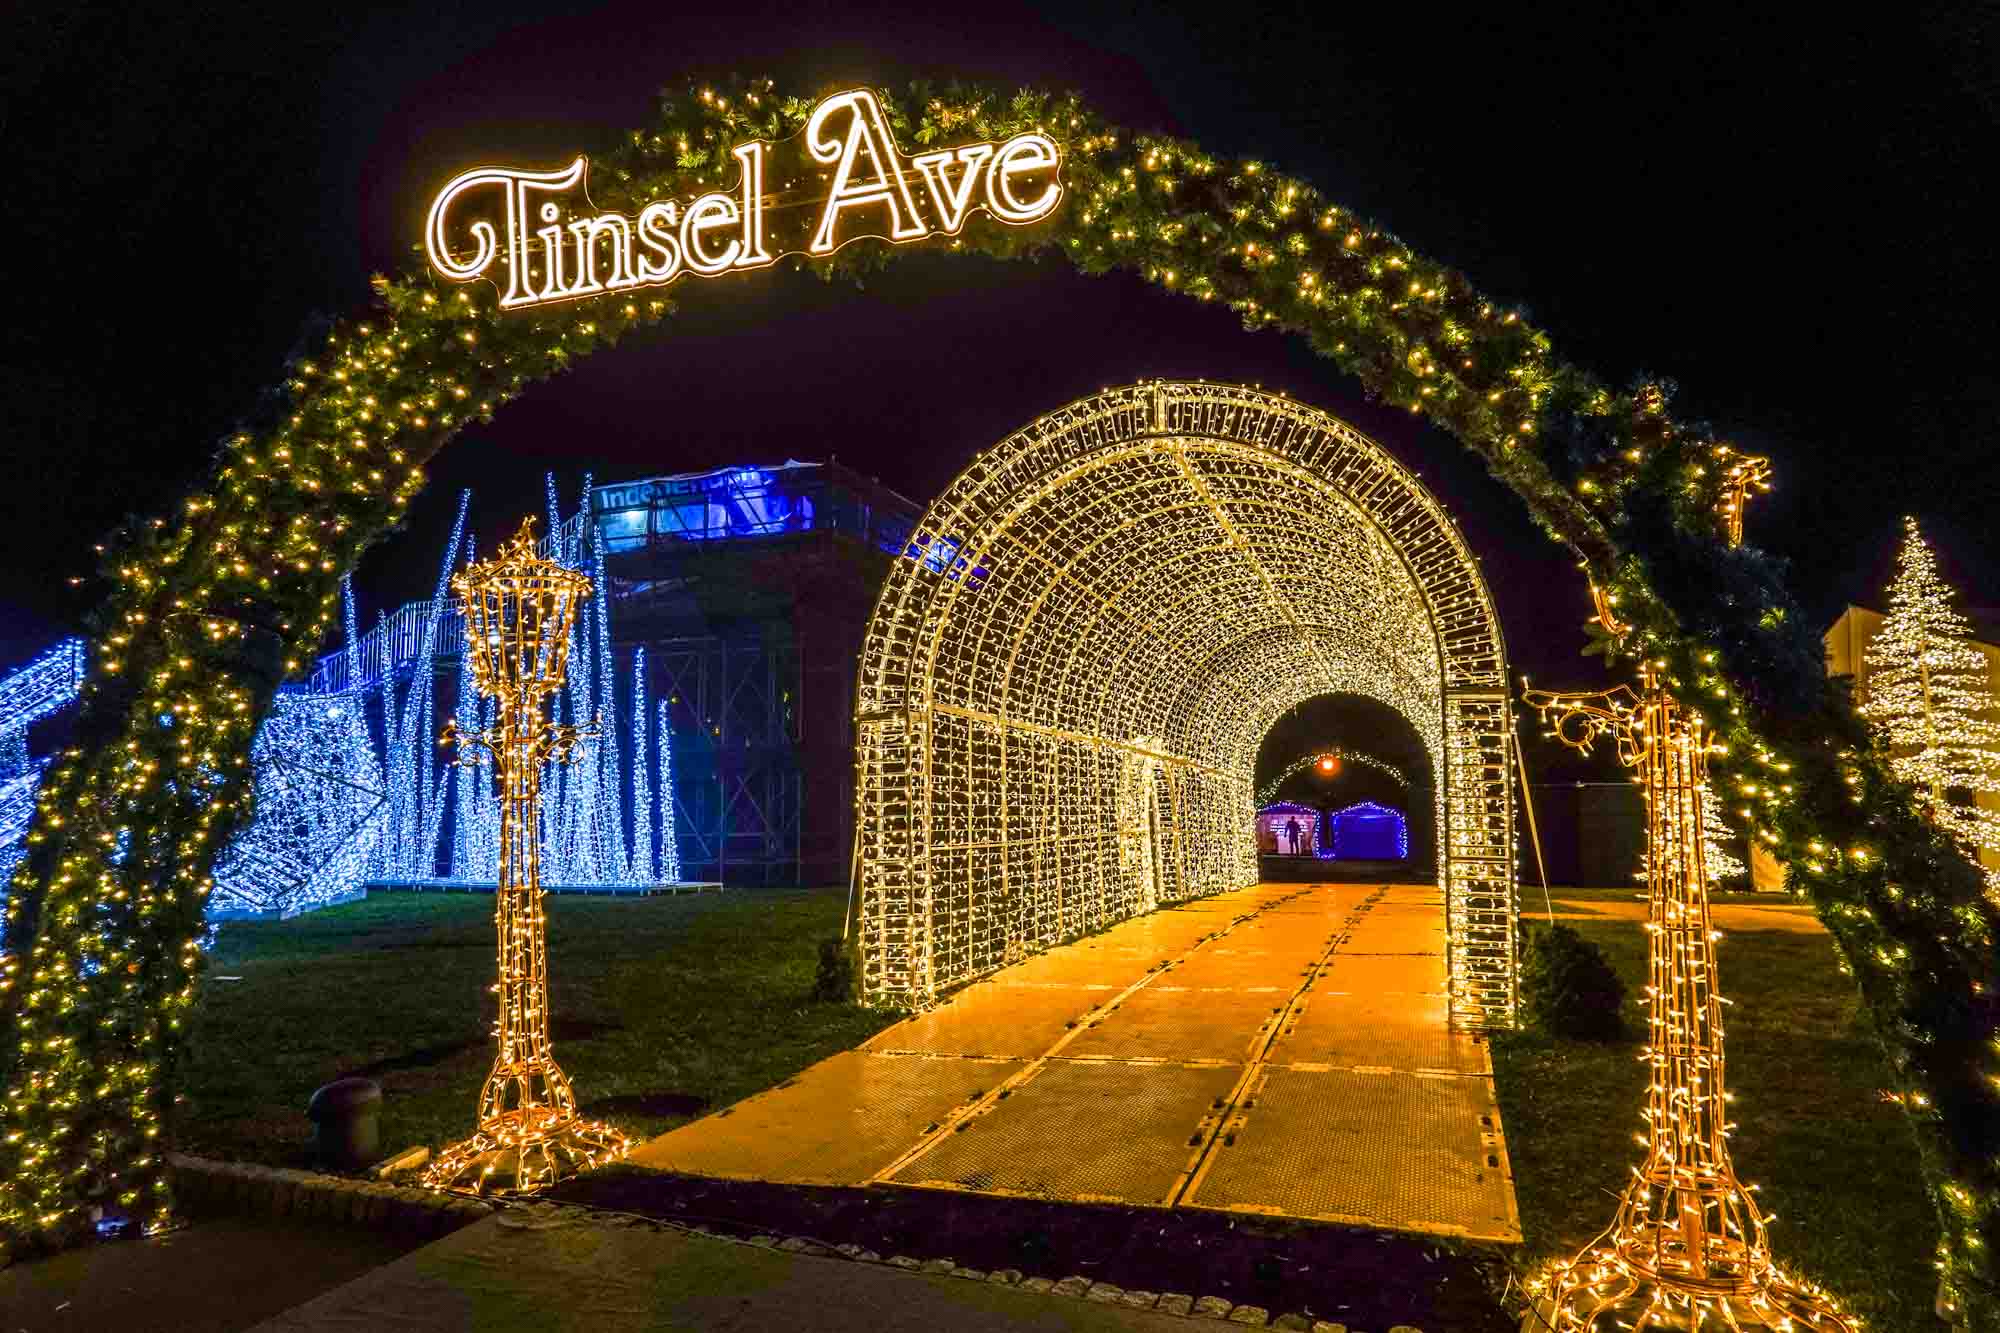 Christmas light tunnel beside a giant garland arch with an illuminated sign for "Tinsel Ave."